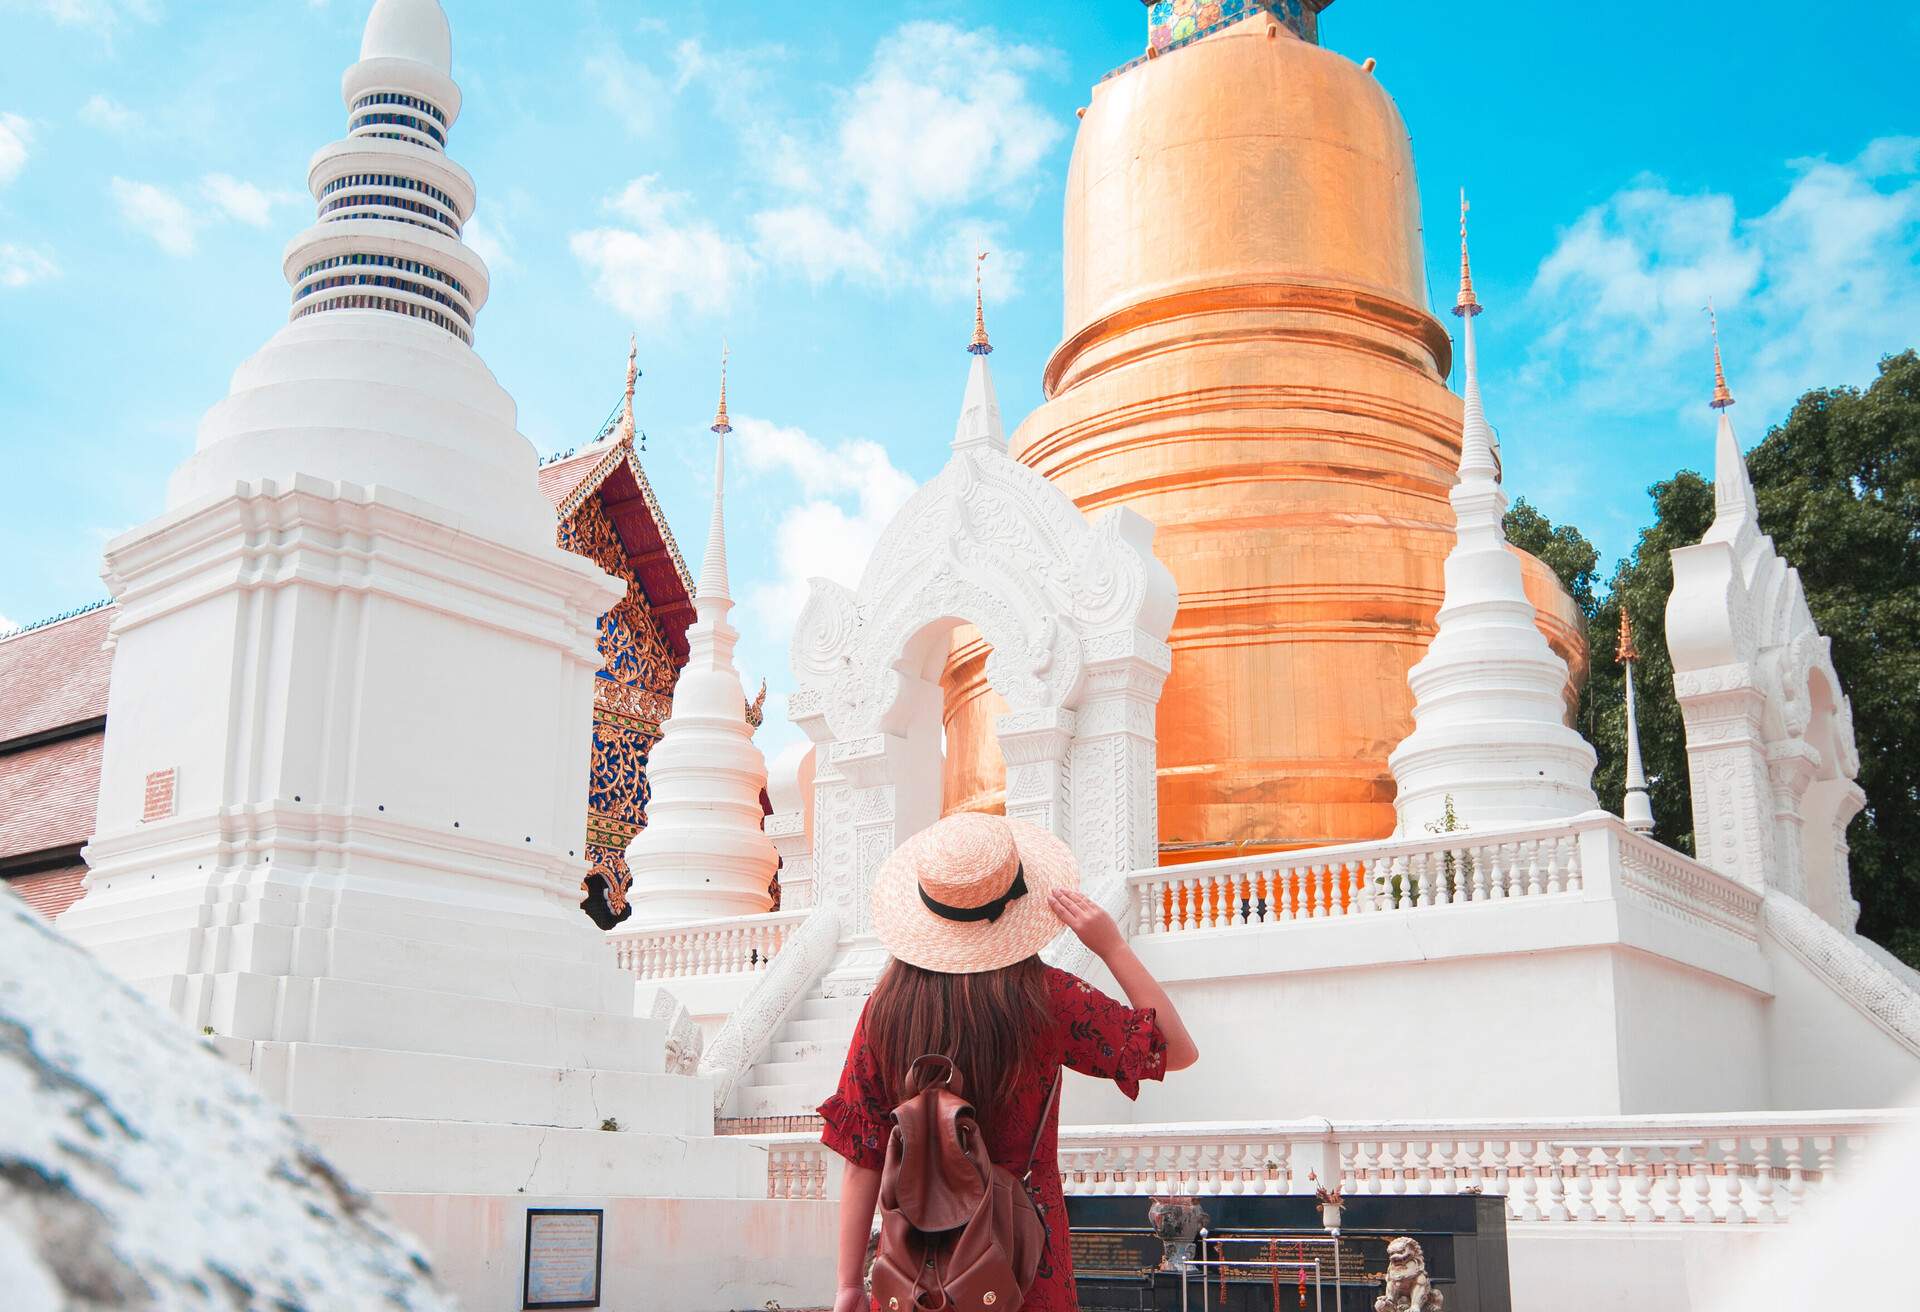 A lady tourist looks in awe at the golden royal temple with a bell-shaped chedi surrounded by white pagodas.